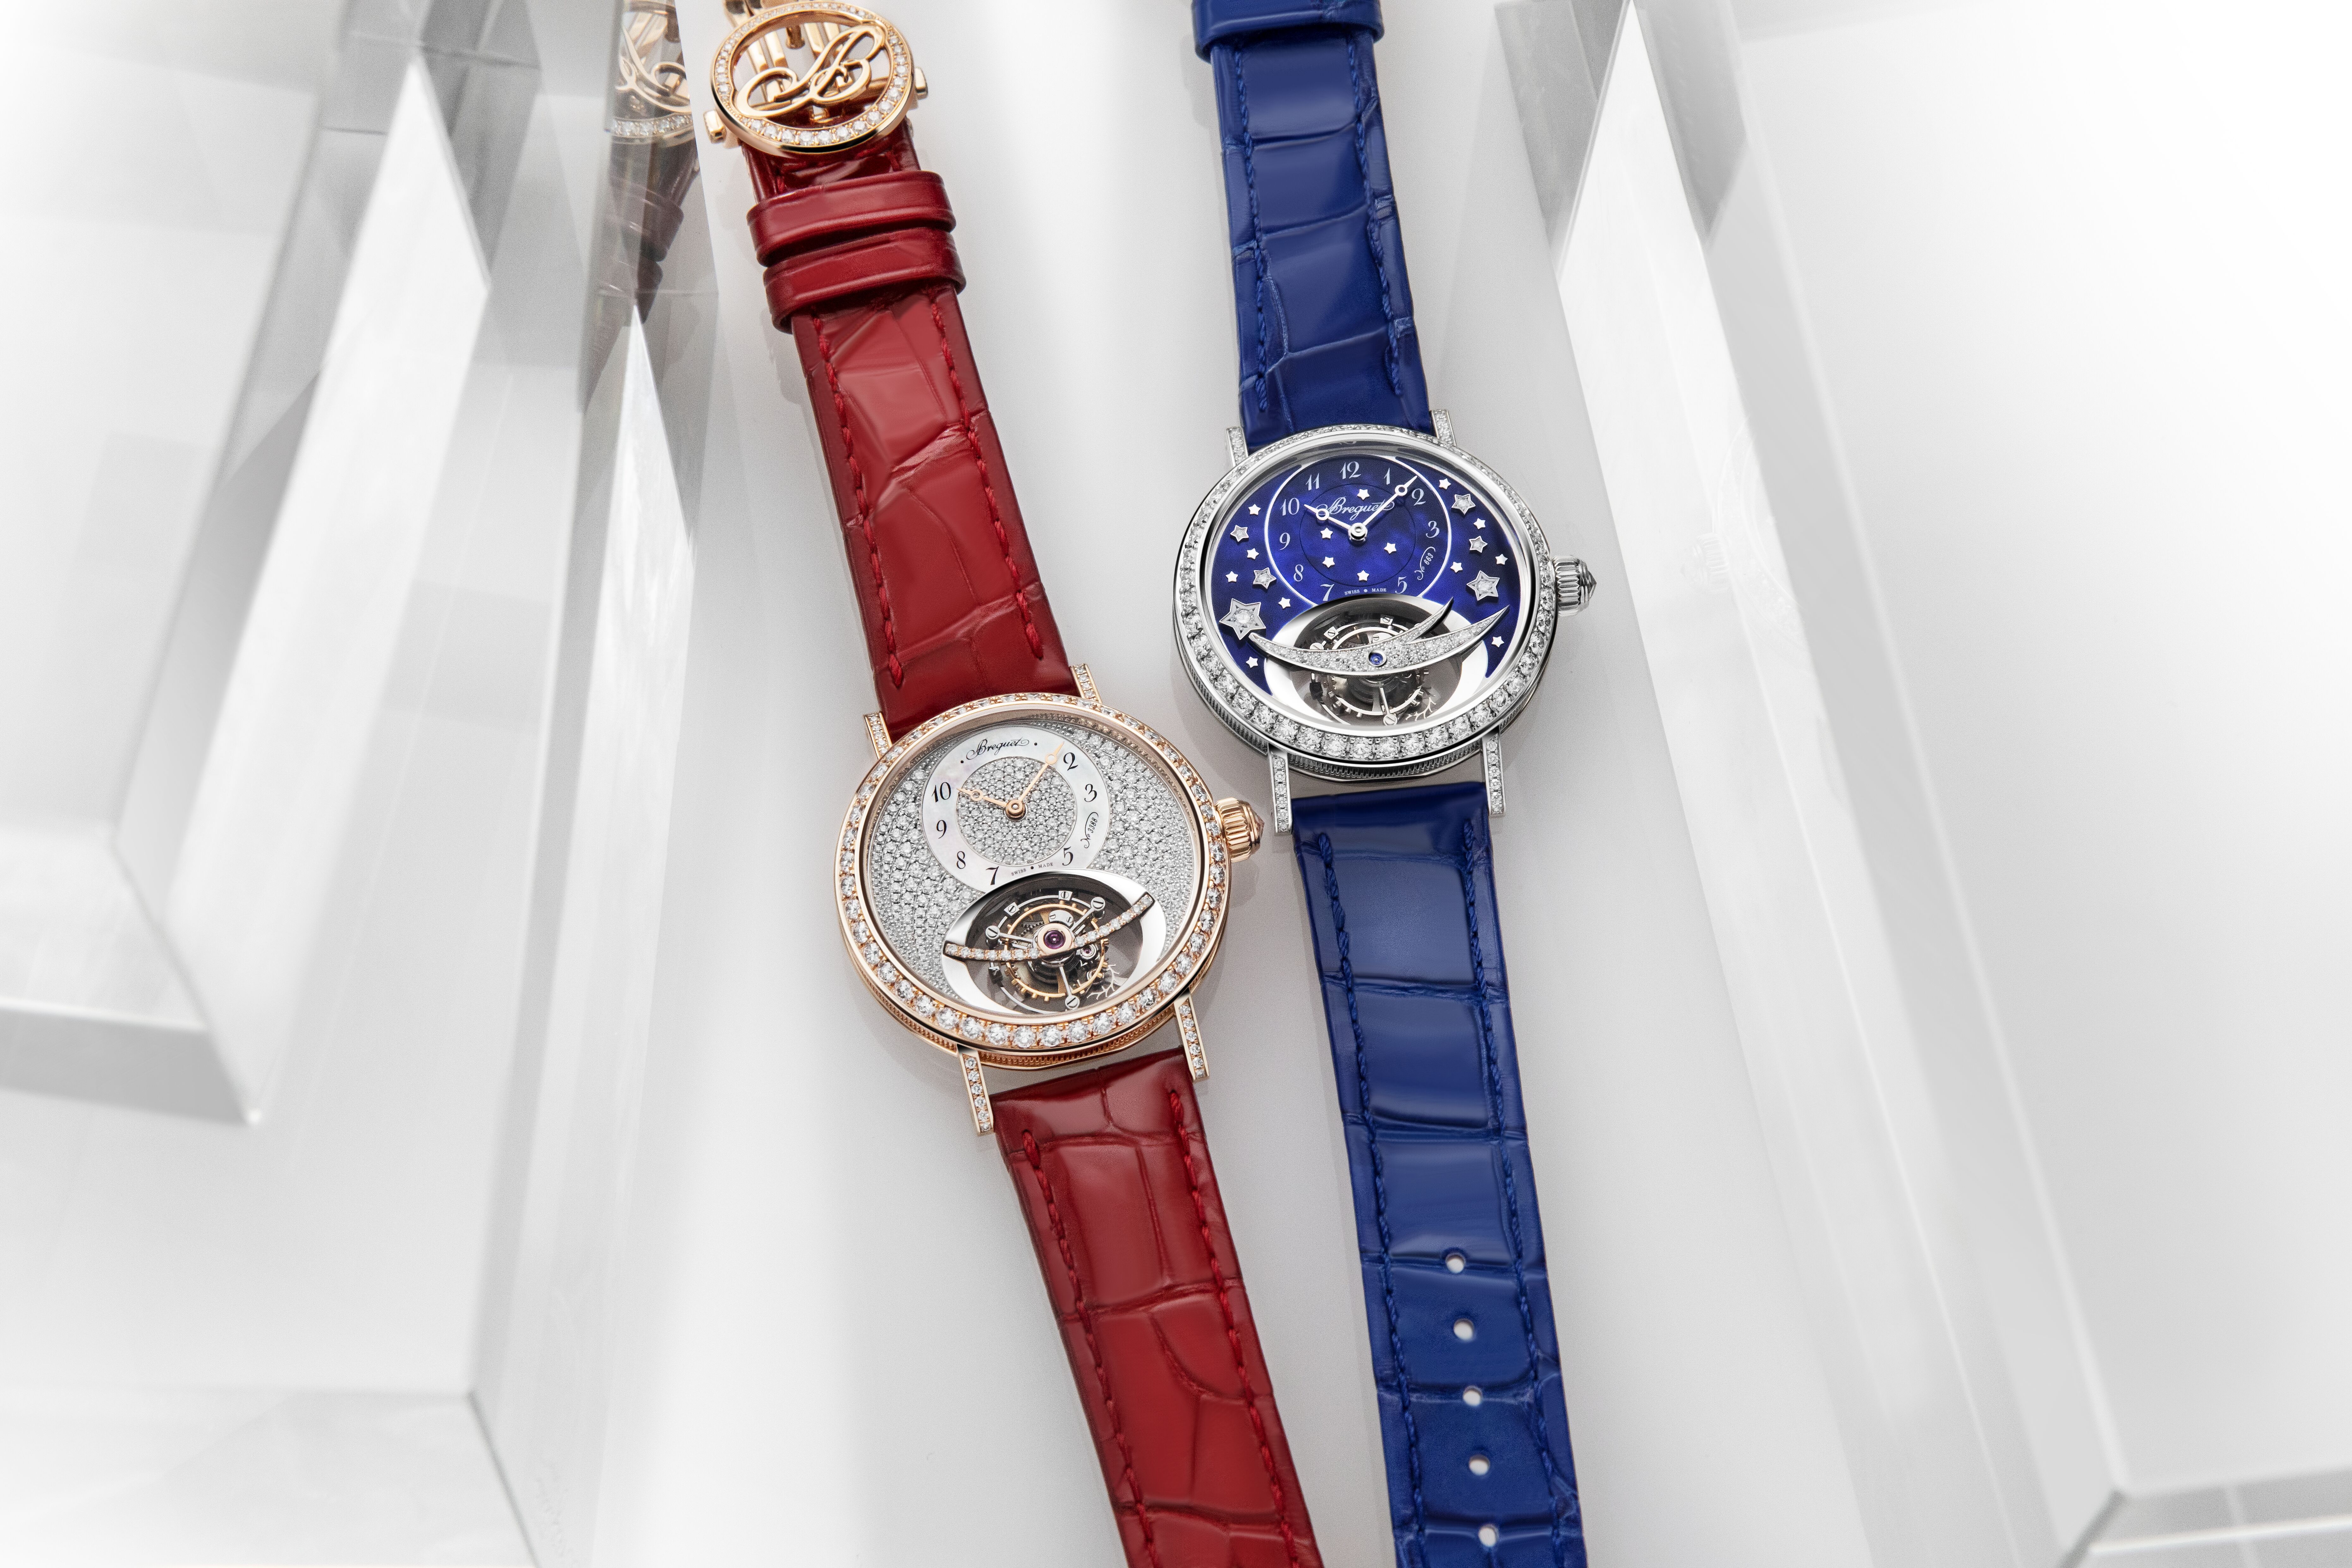 Breguet-collection-classique-holiday-gift-guide-tourbillon-2023-red-blue-watch-snow-setting-diamond-2023